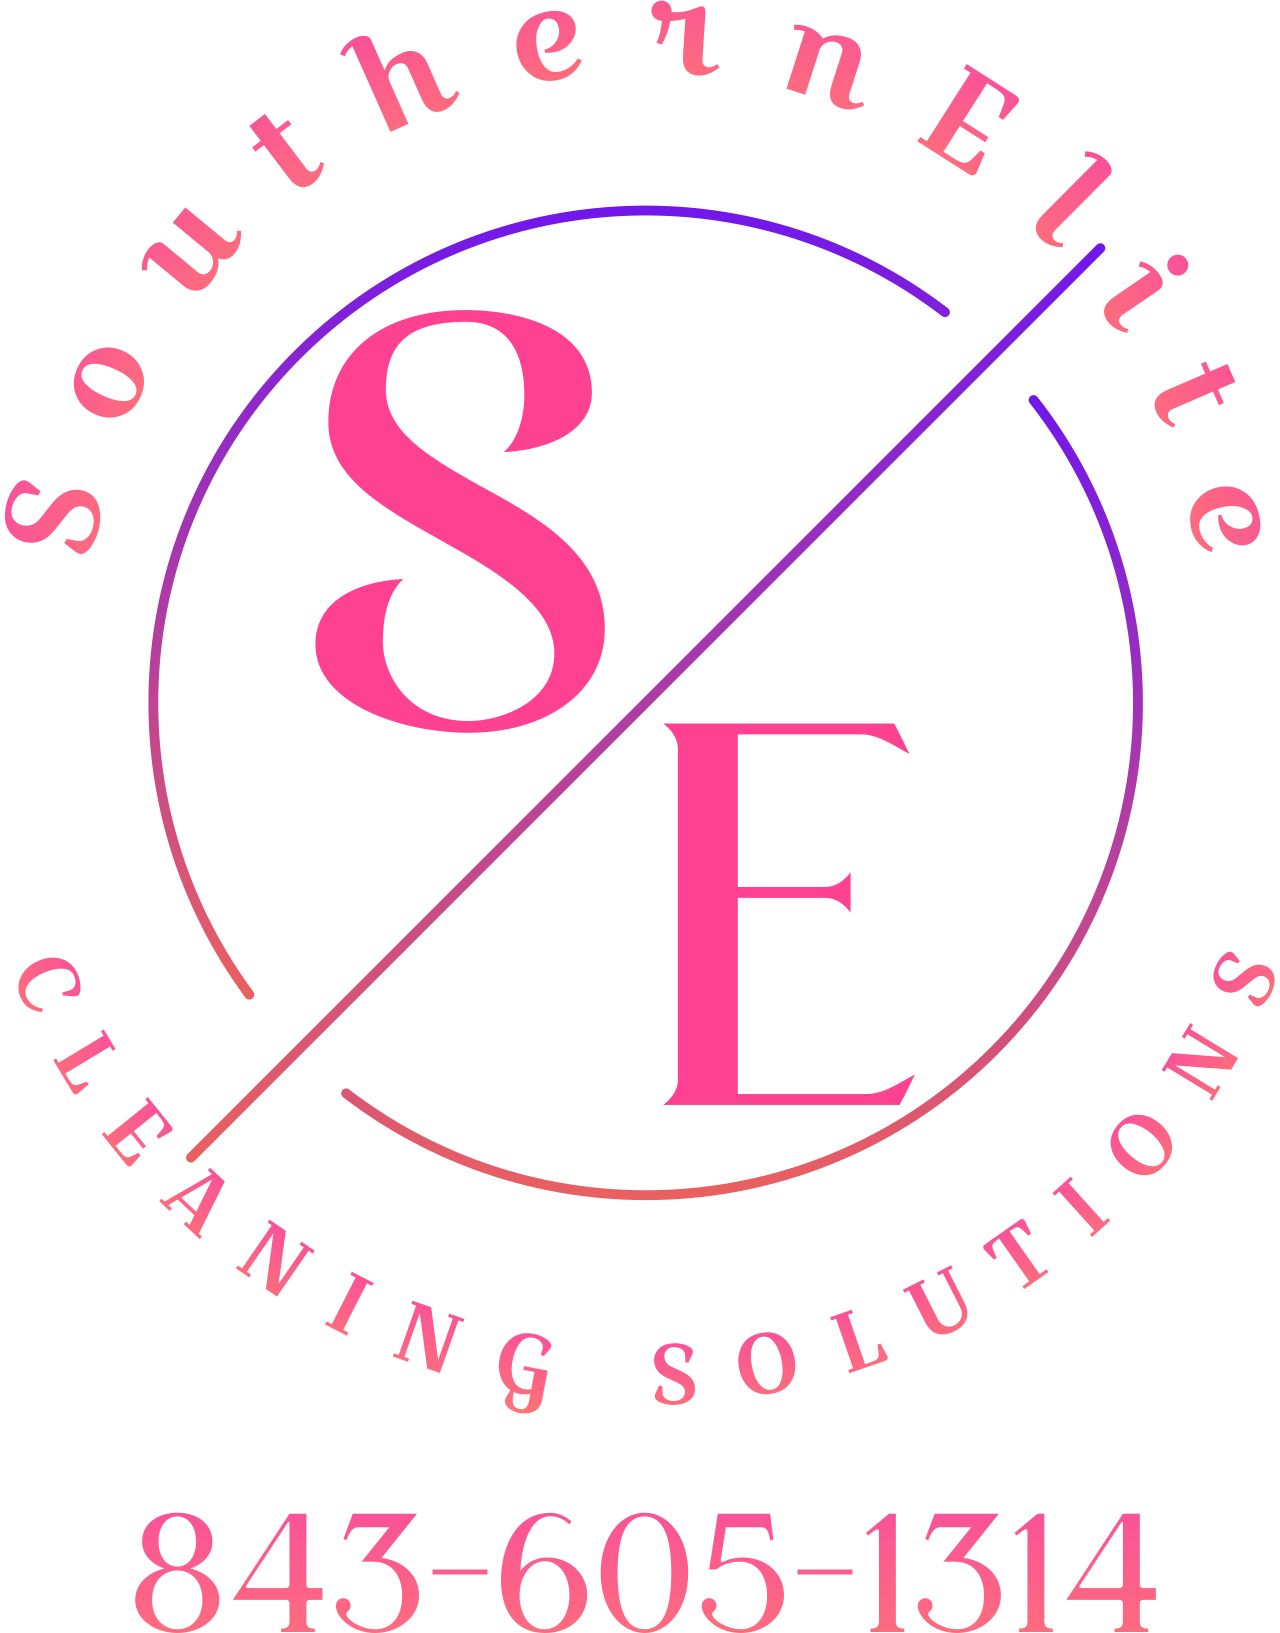 CLEANING SOLUTIONS's logo